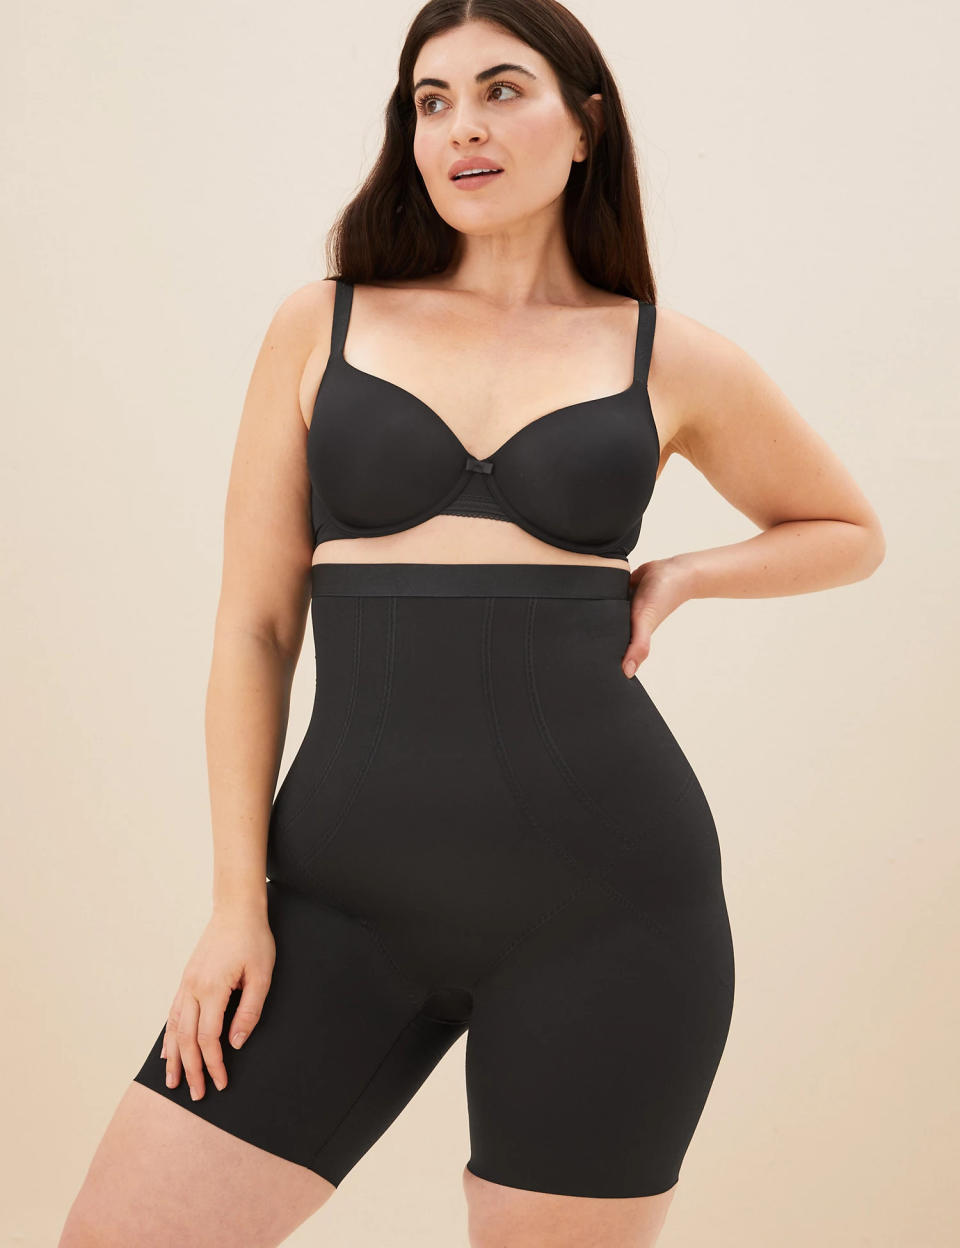 These pants are the best shapewear to give you a confidence boost in whatever you're wearing. (Marks & Spencer)